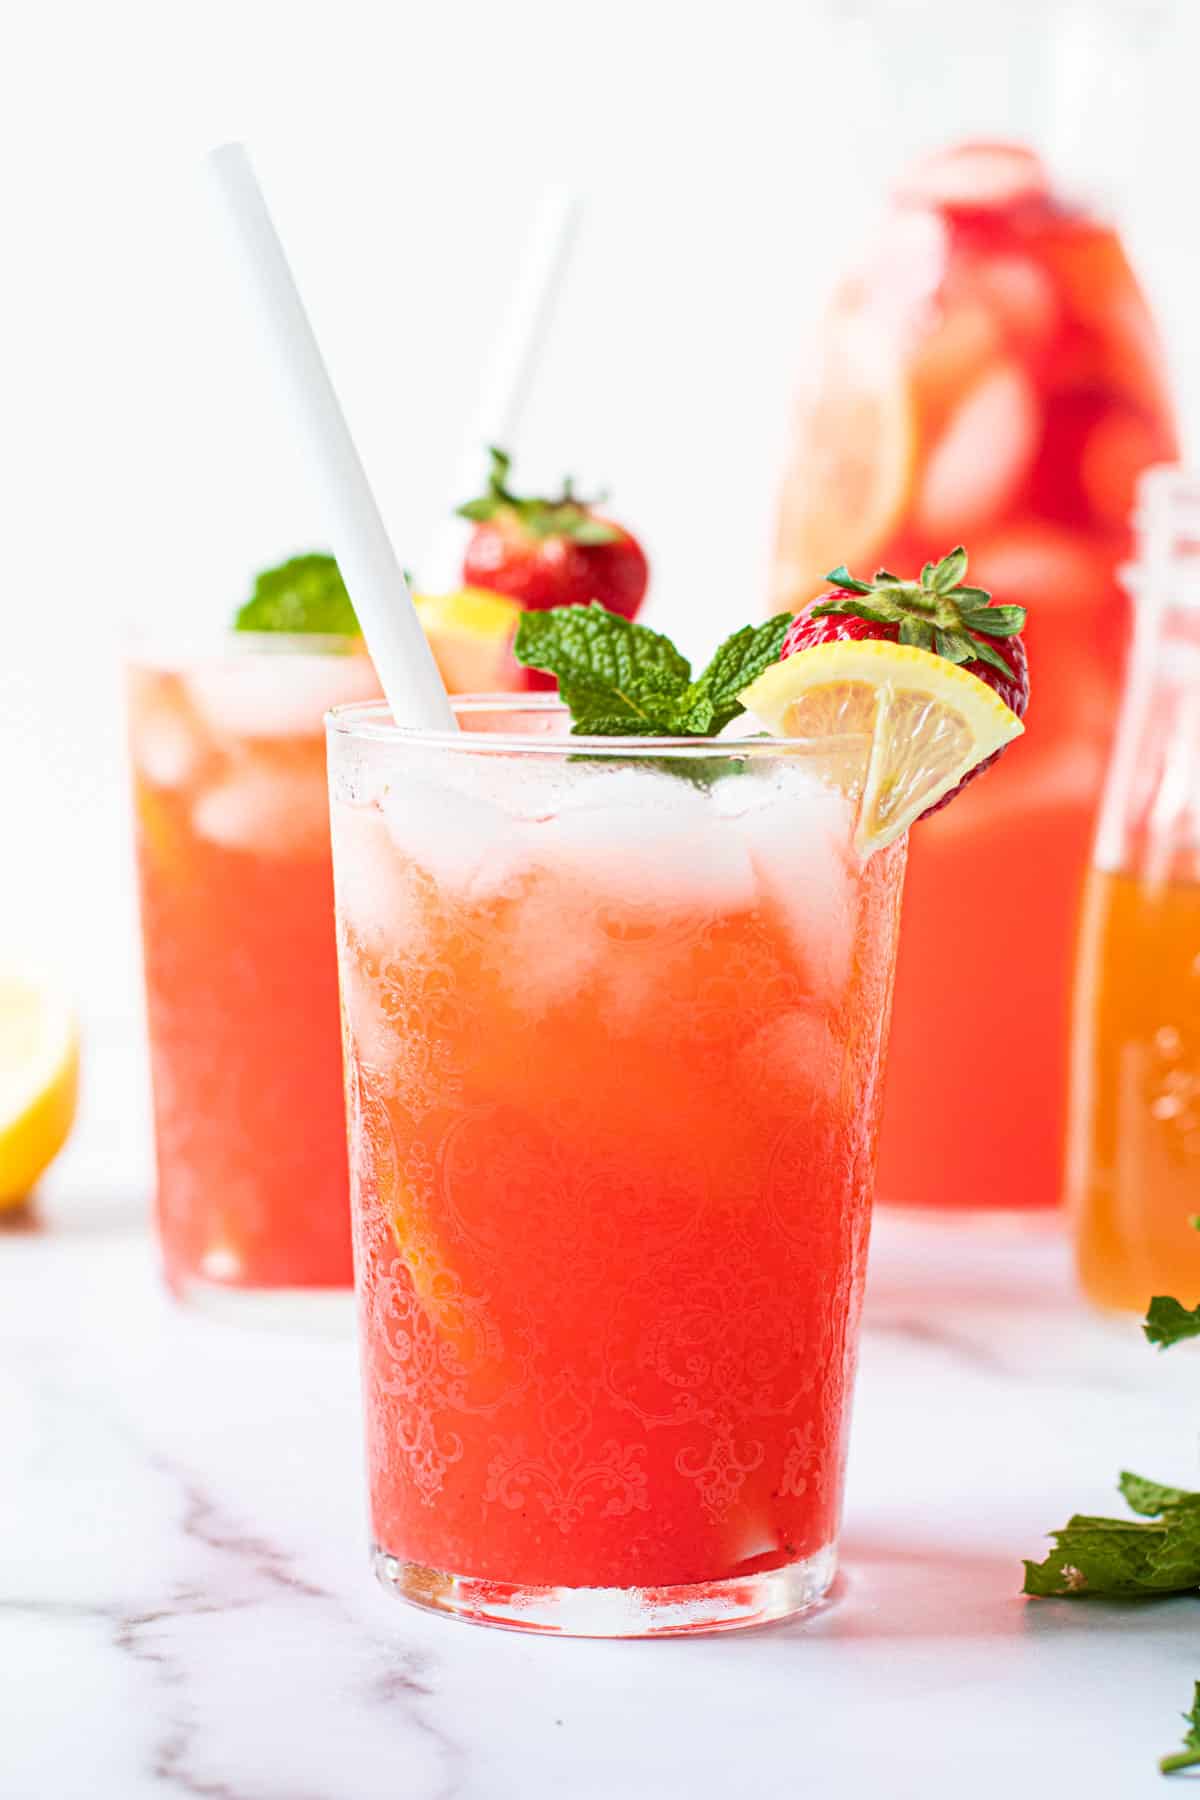 Can I Drink Strawberry Lemonade While Pregnant? 